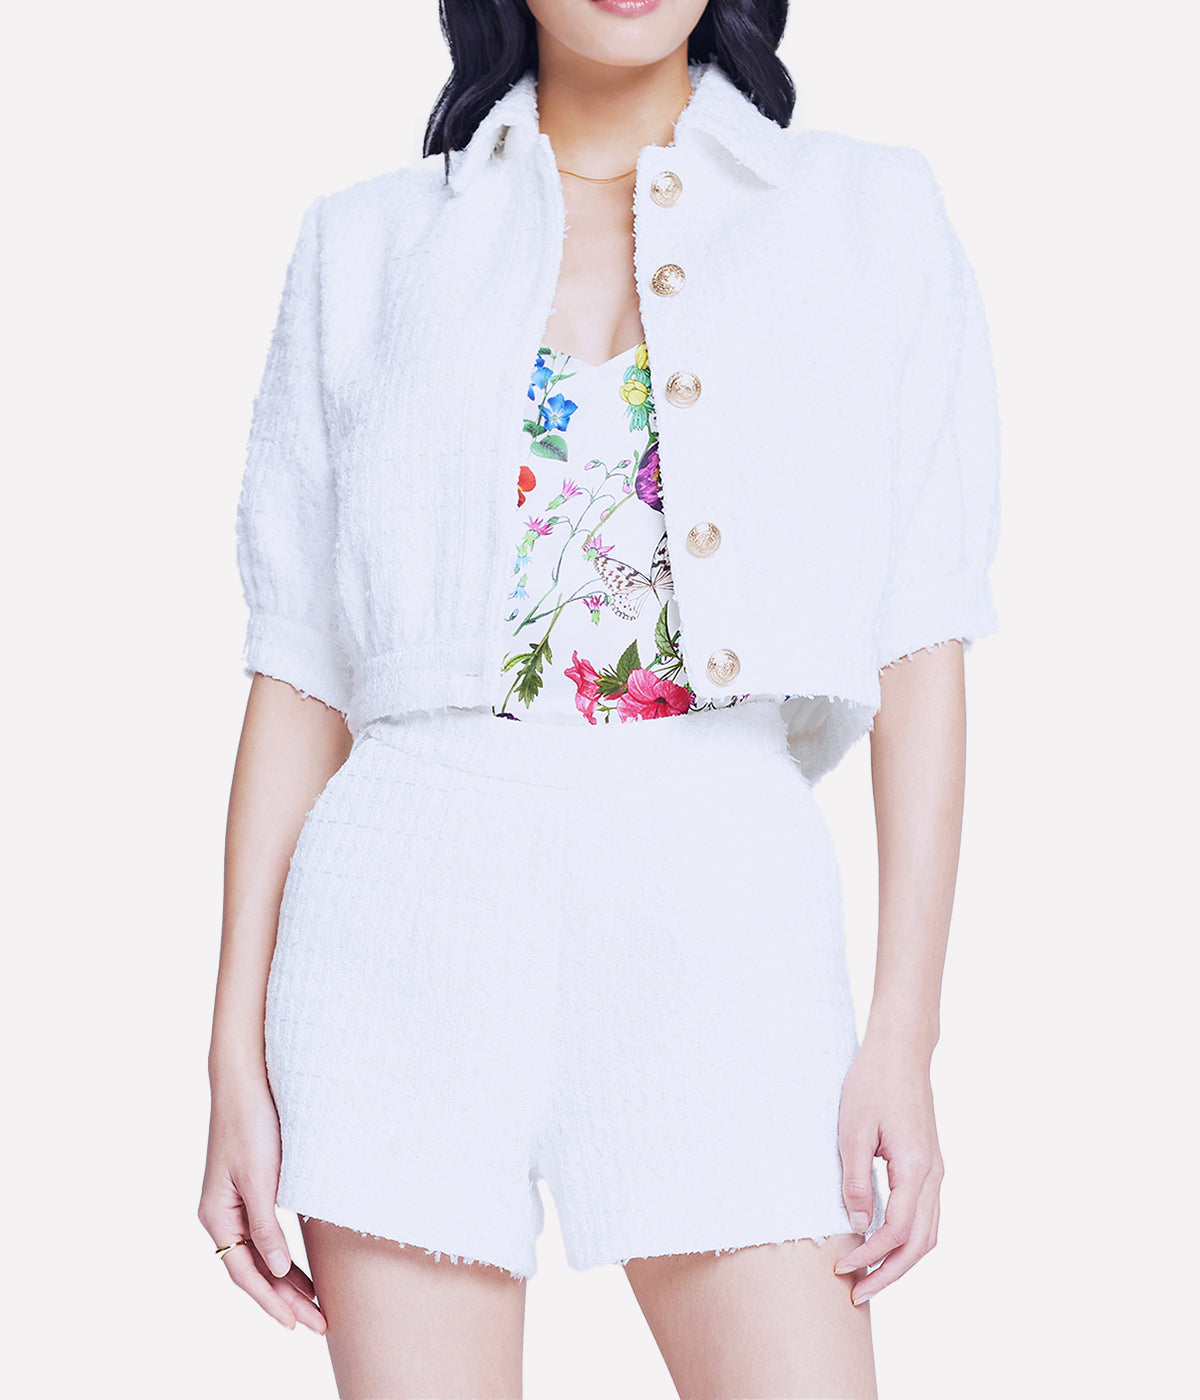 Cove Crop Shirt Sleeve Jacket in White